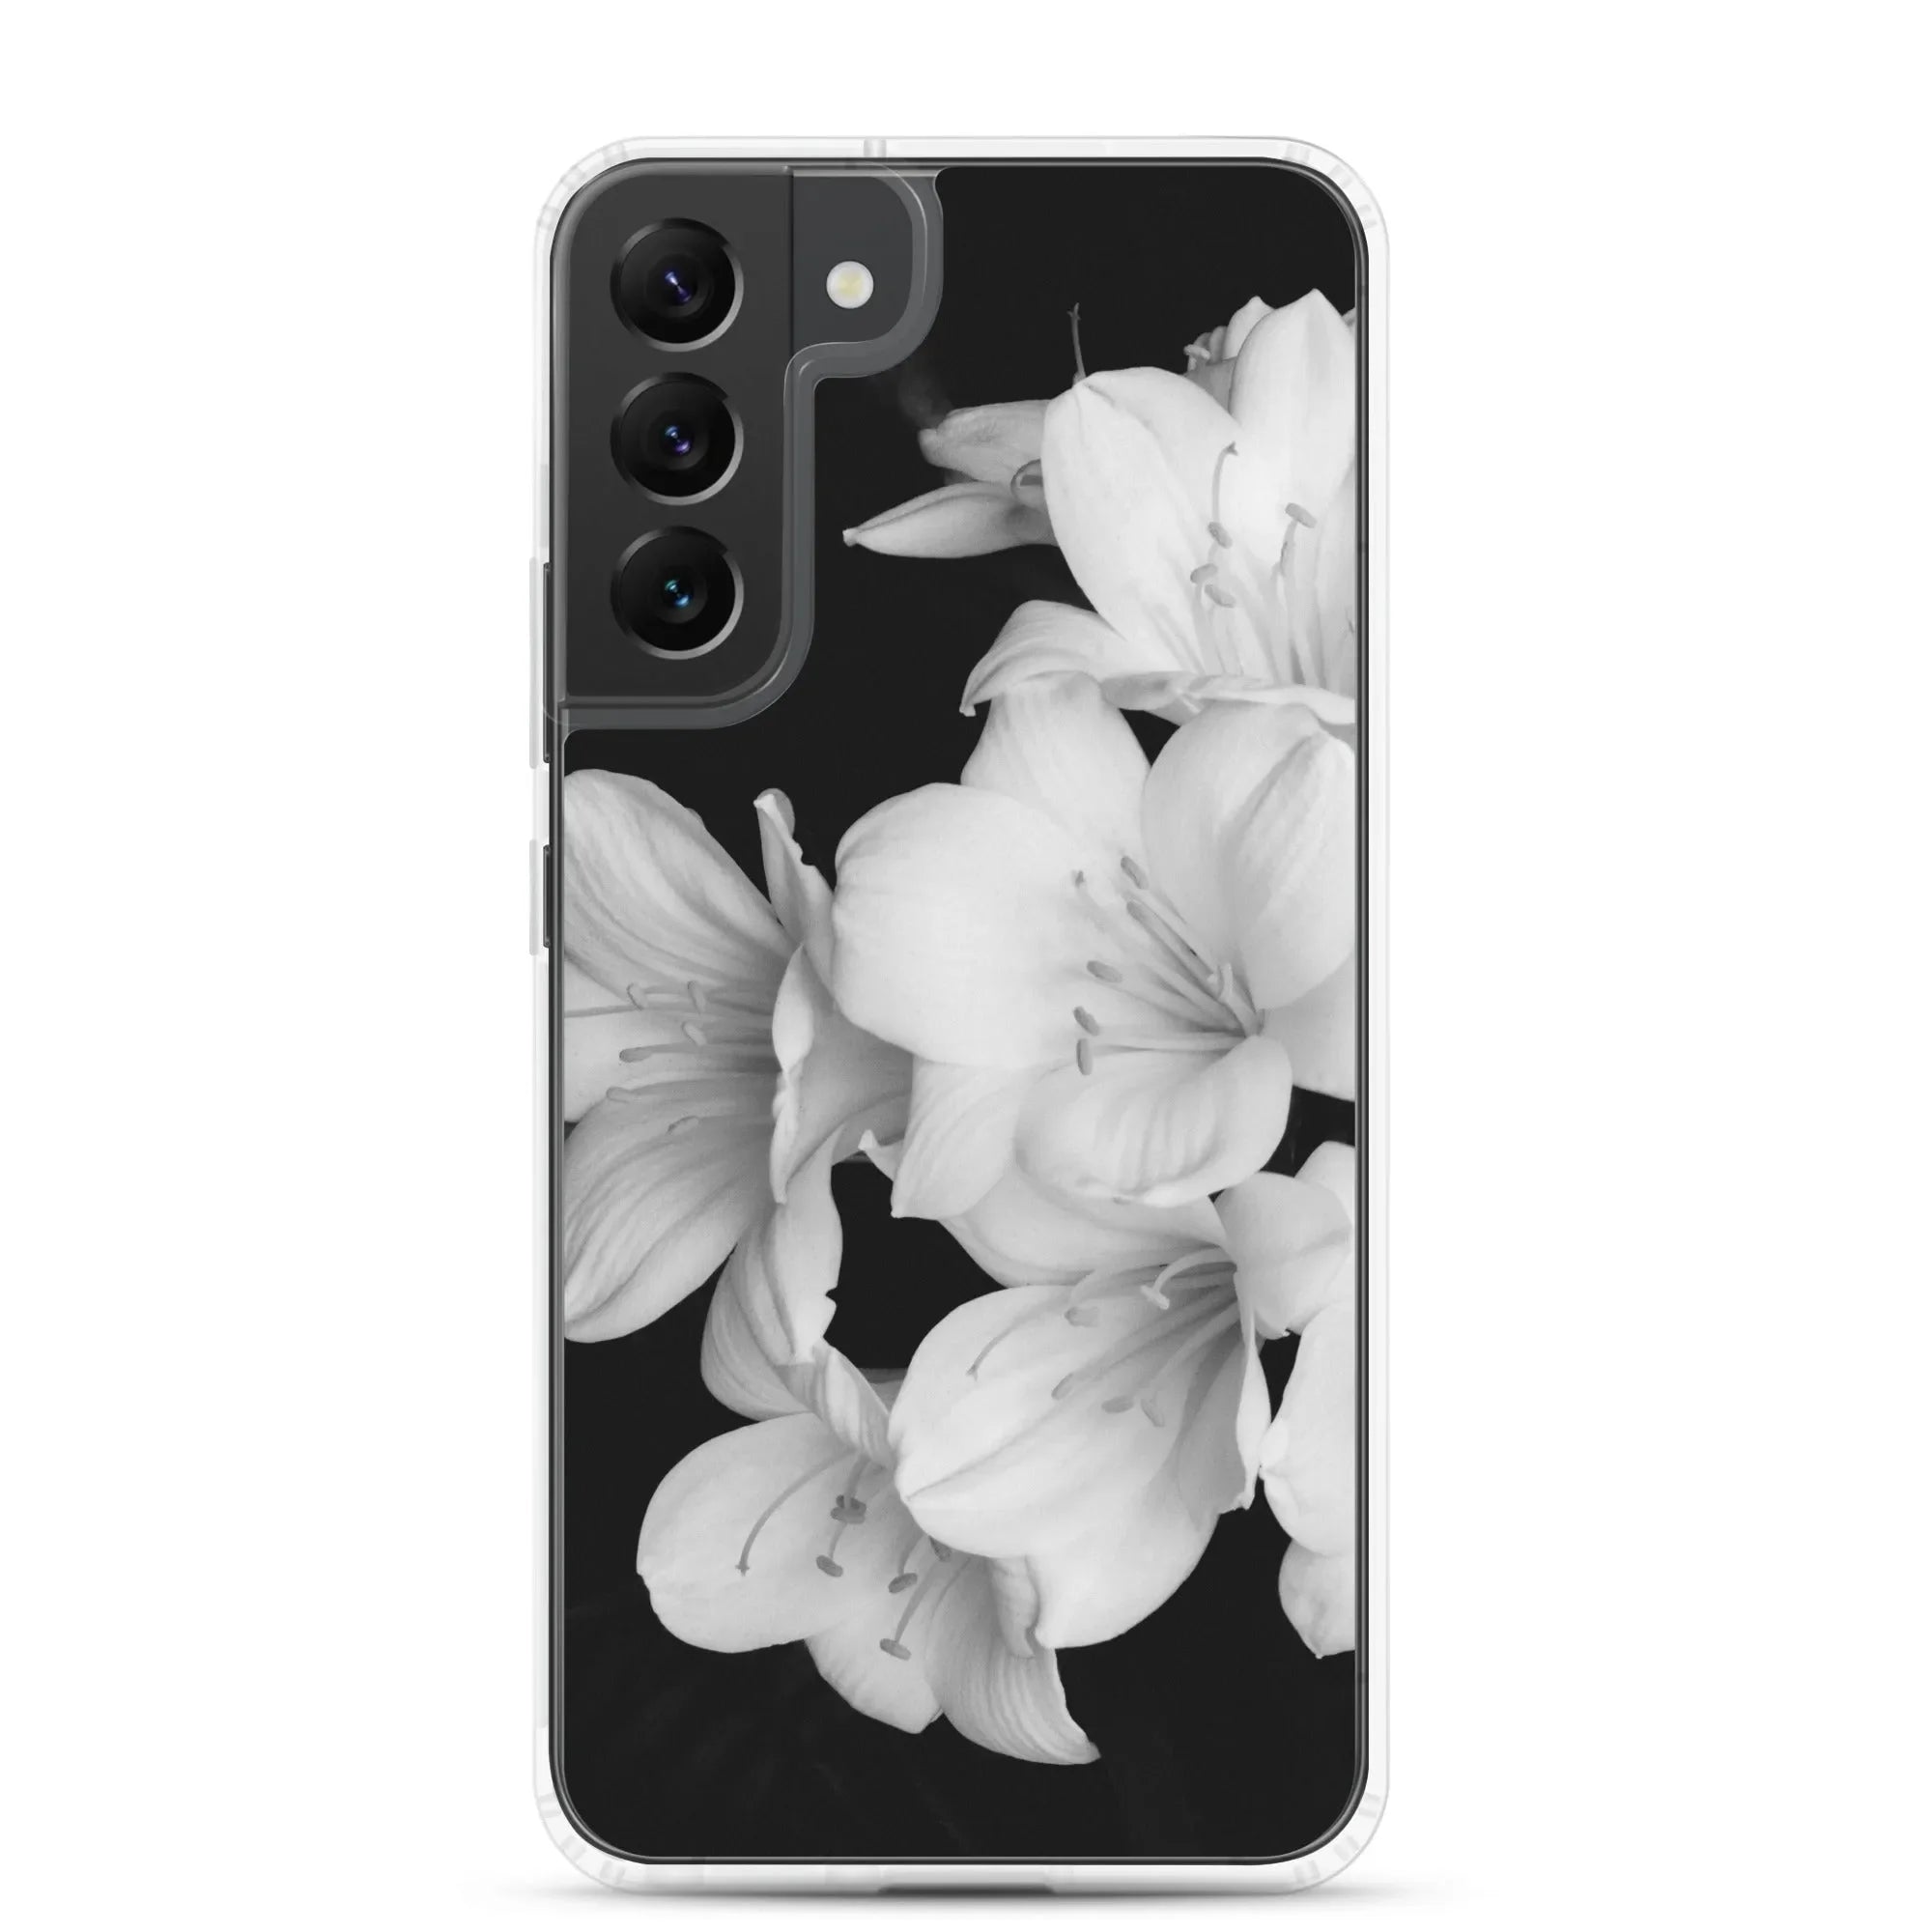 Flower Power 2 + Too Samsung Galaxy Case - Black And White - Samsung Galaxy S22 Plus - Mobile Phone Cases - Aesthetic